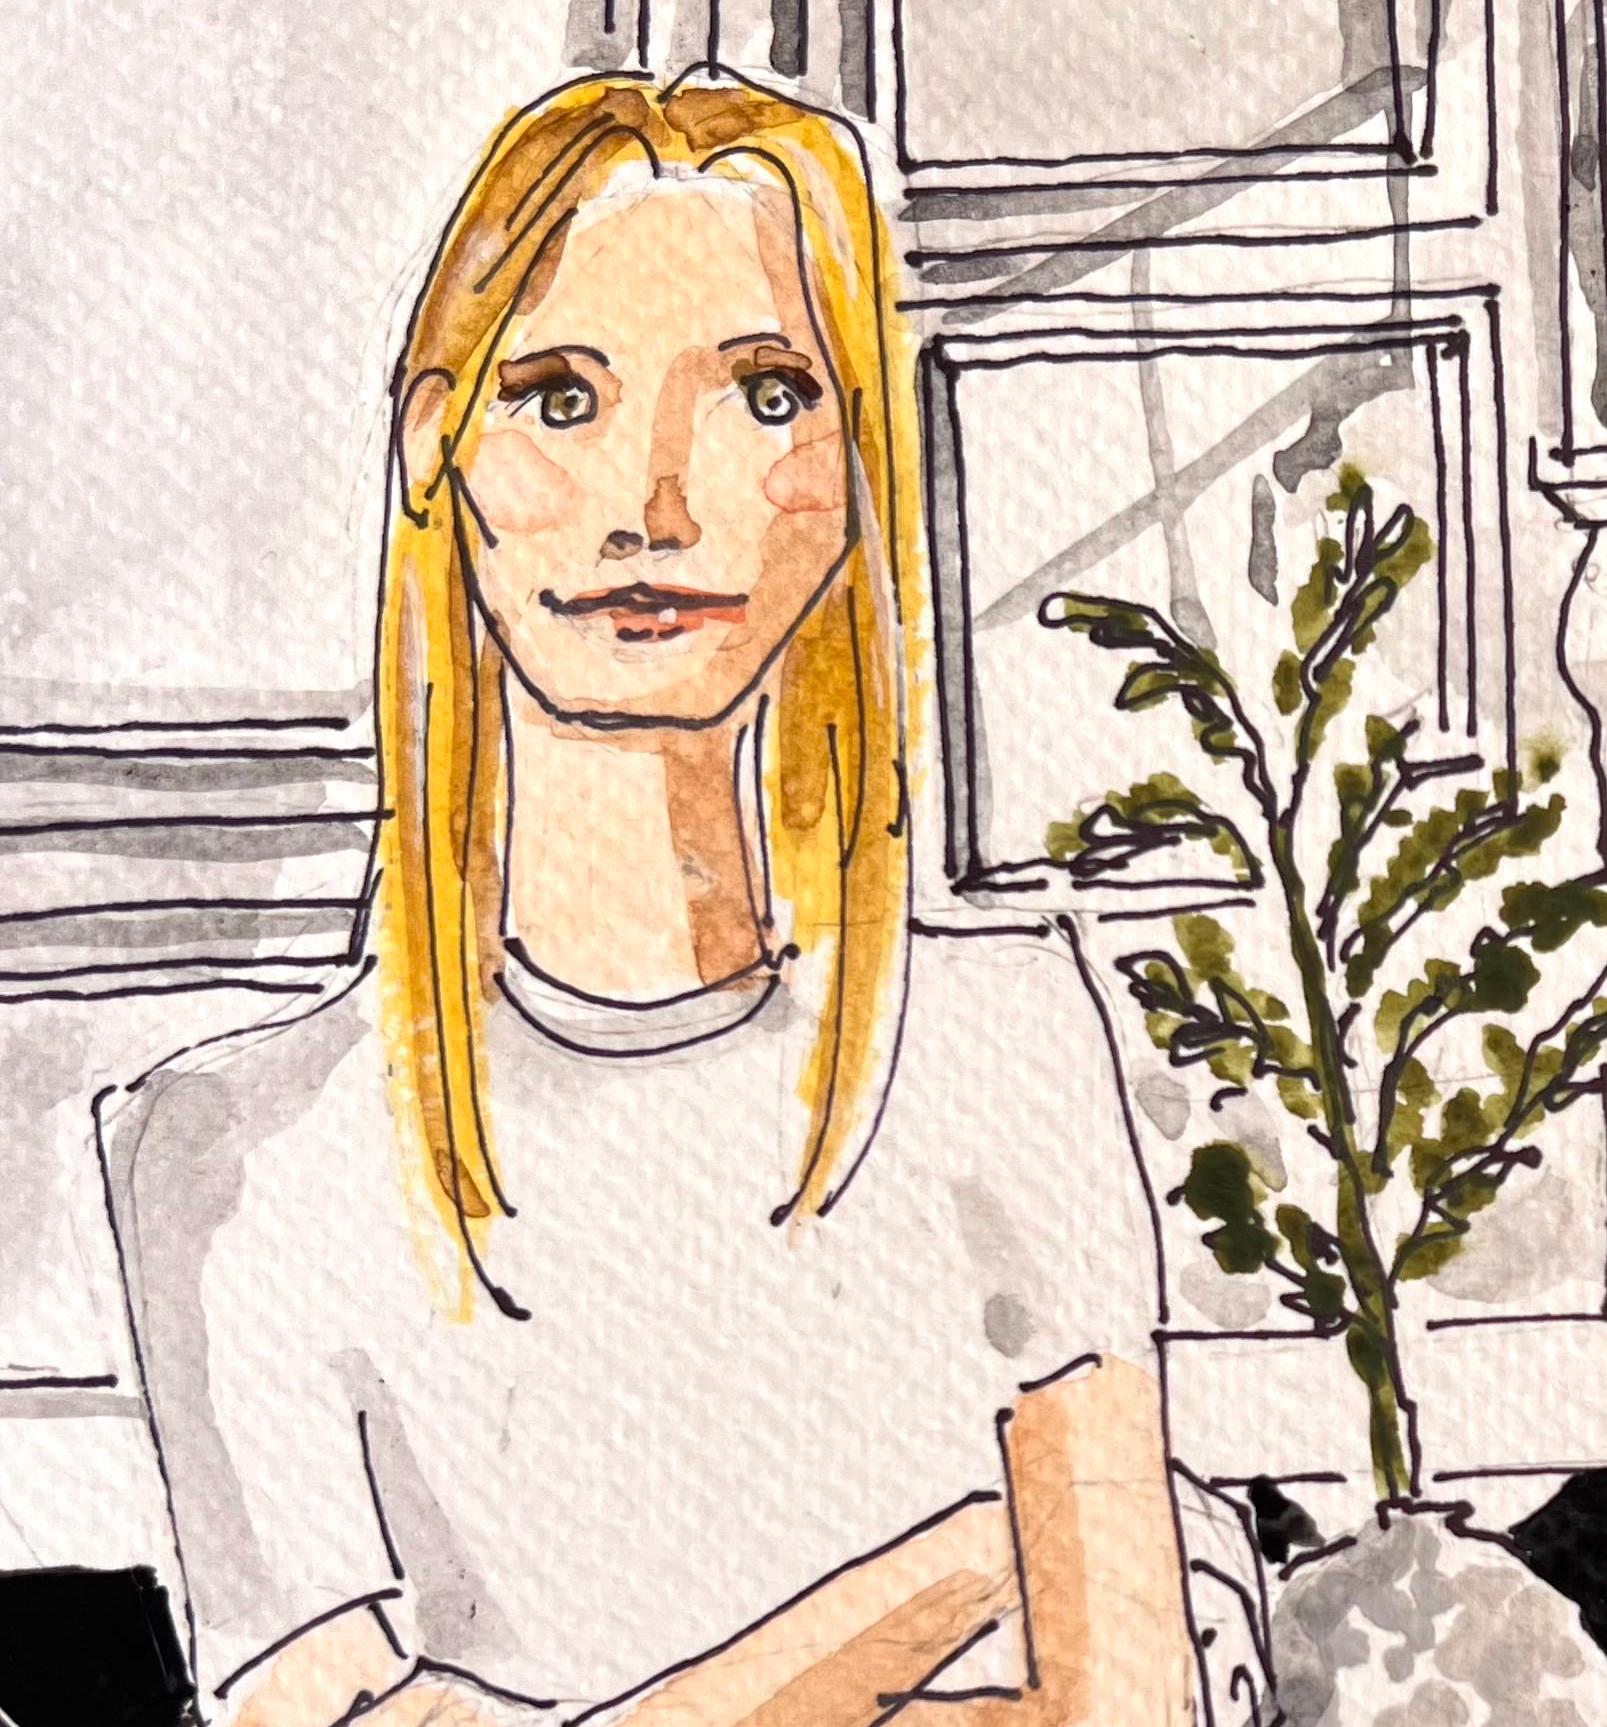 Actress Gwyneth Paltrow at home in Montecito, CA Ink and watercolor on paper - Art by Manuel Santelices